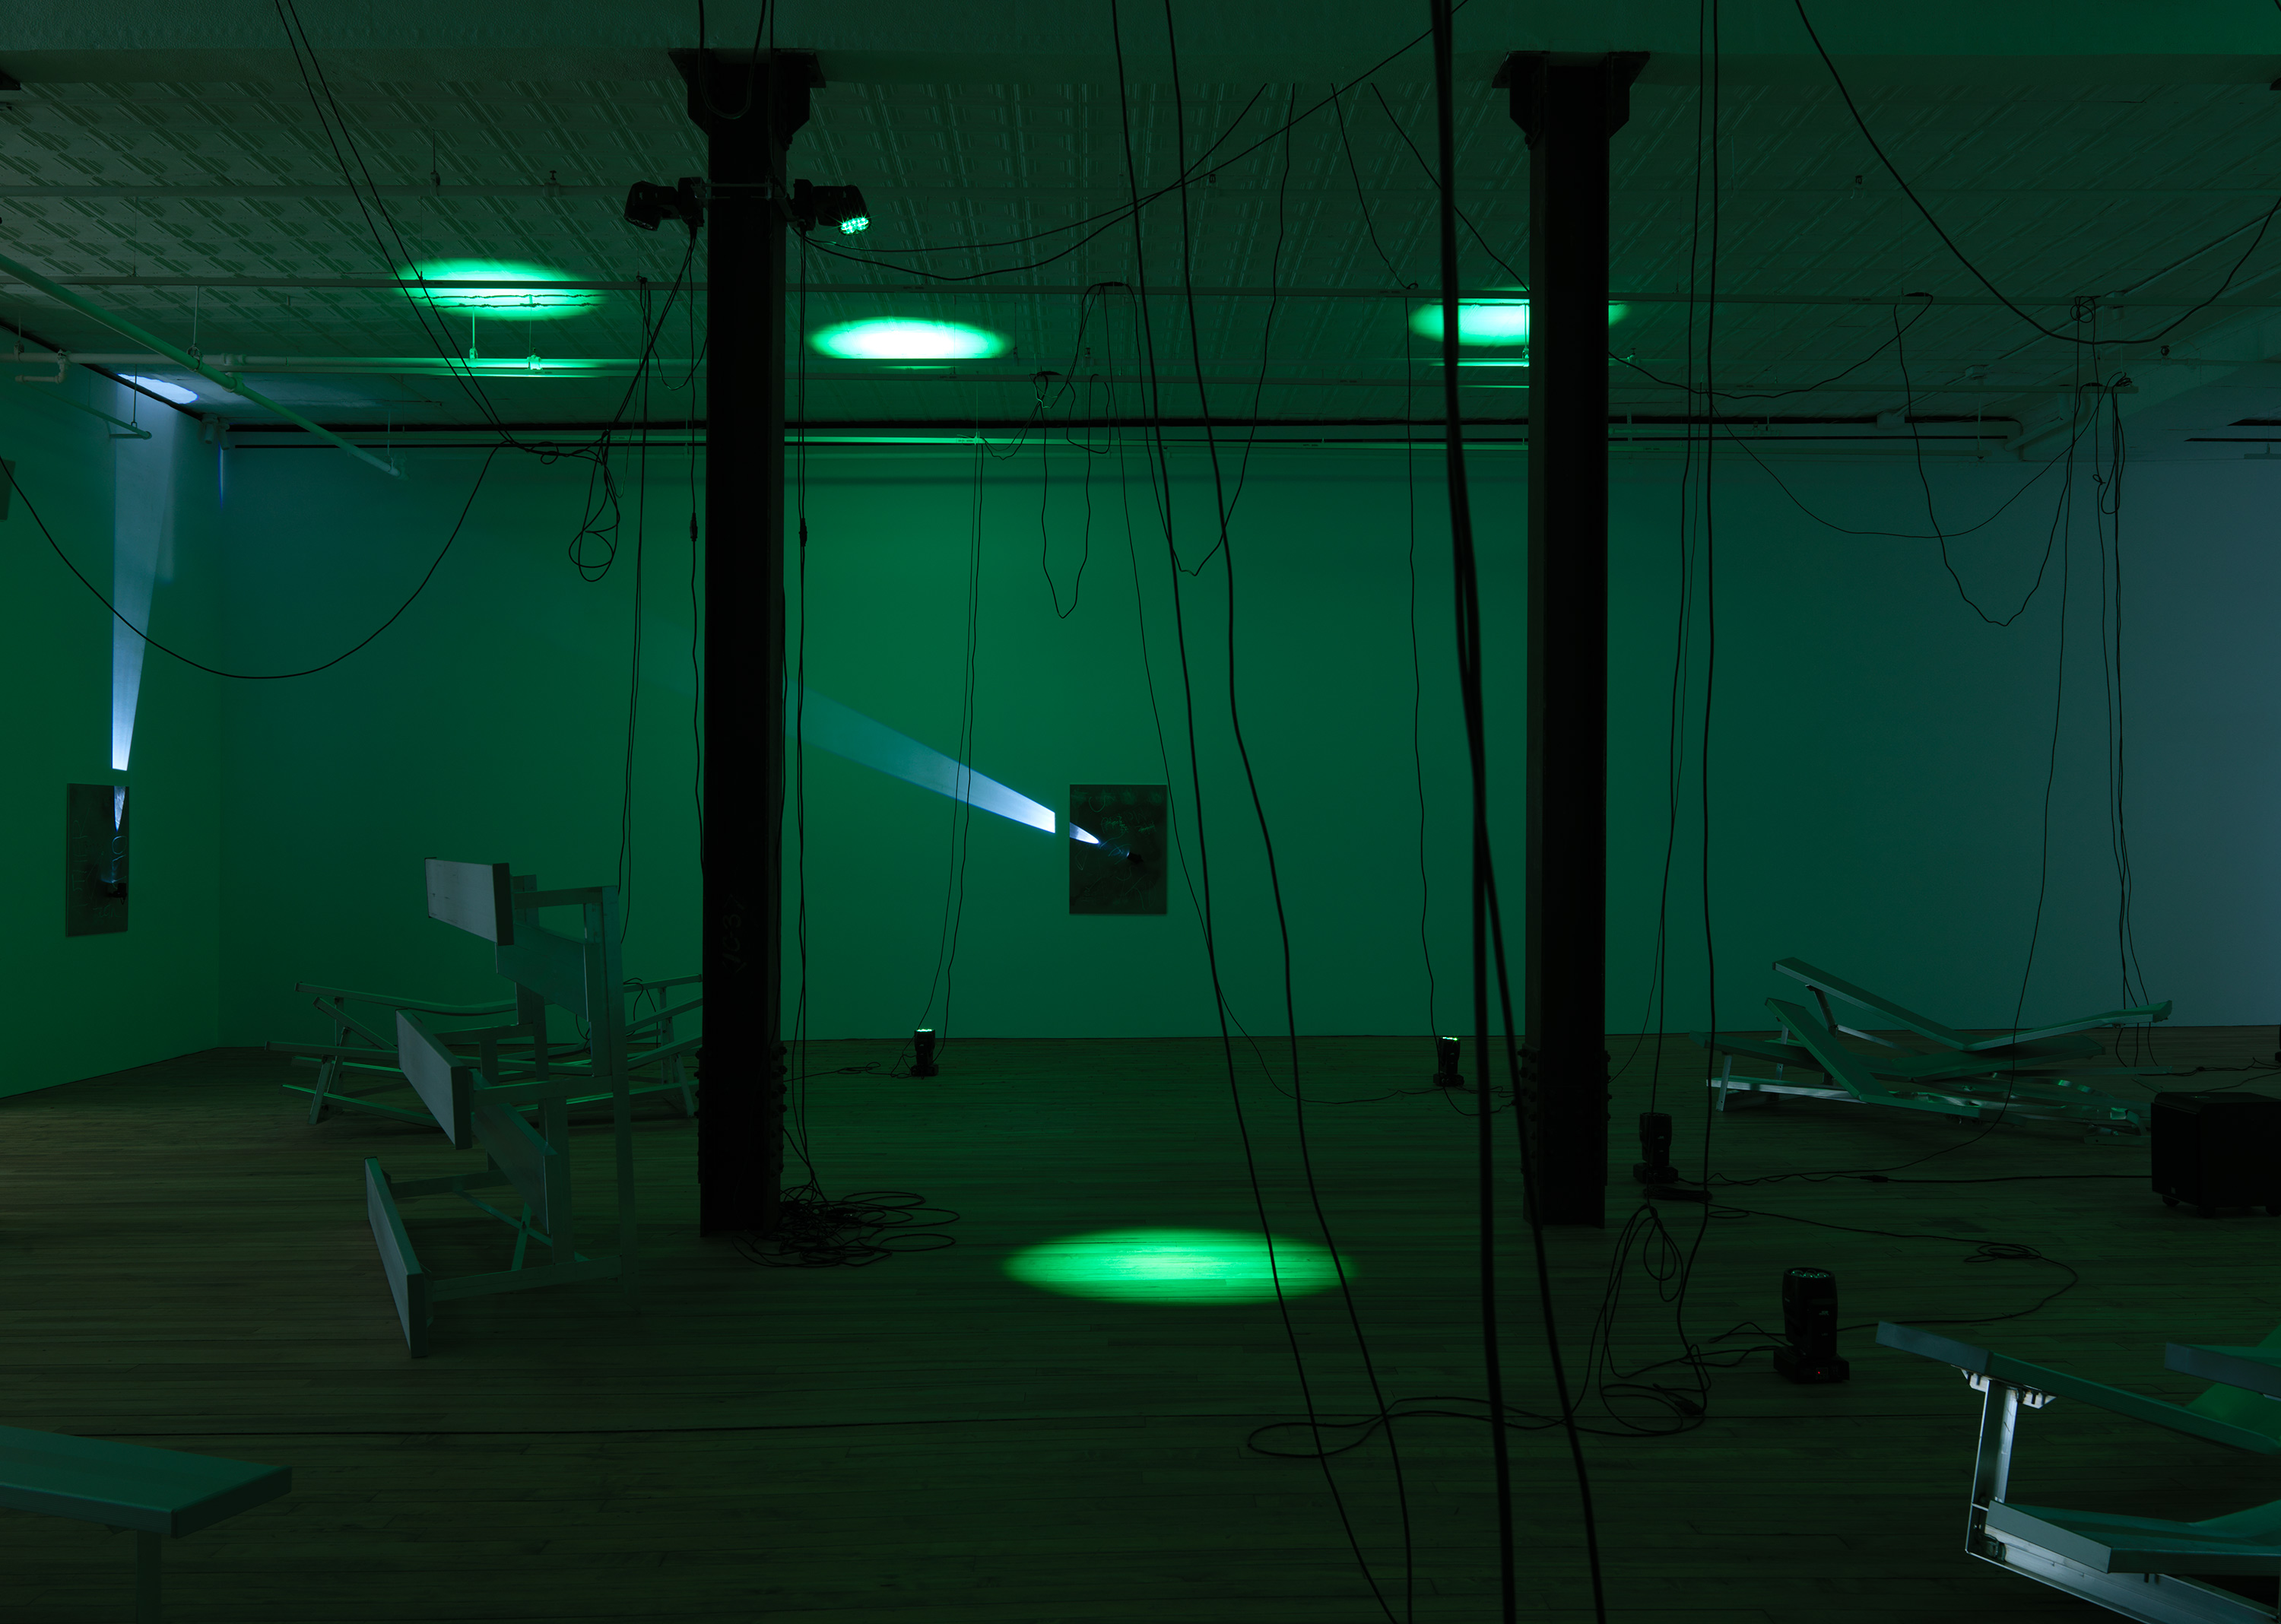 Installation view of the exhibition, Nikita Gale: END OF SUBJECT, at 52 Walker in New York City, dated 2022.